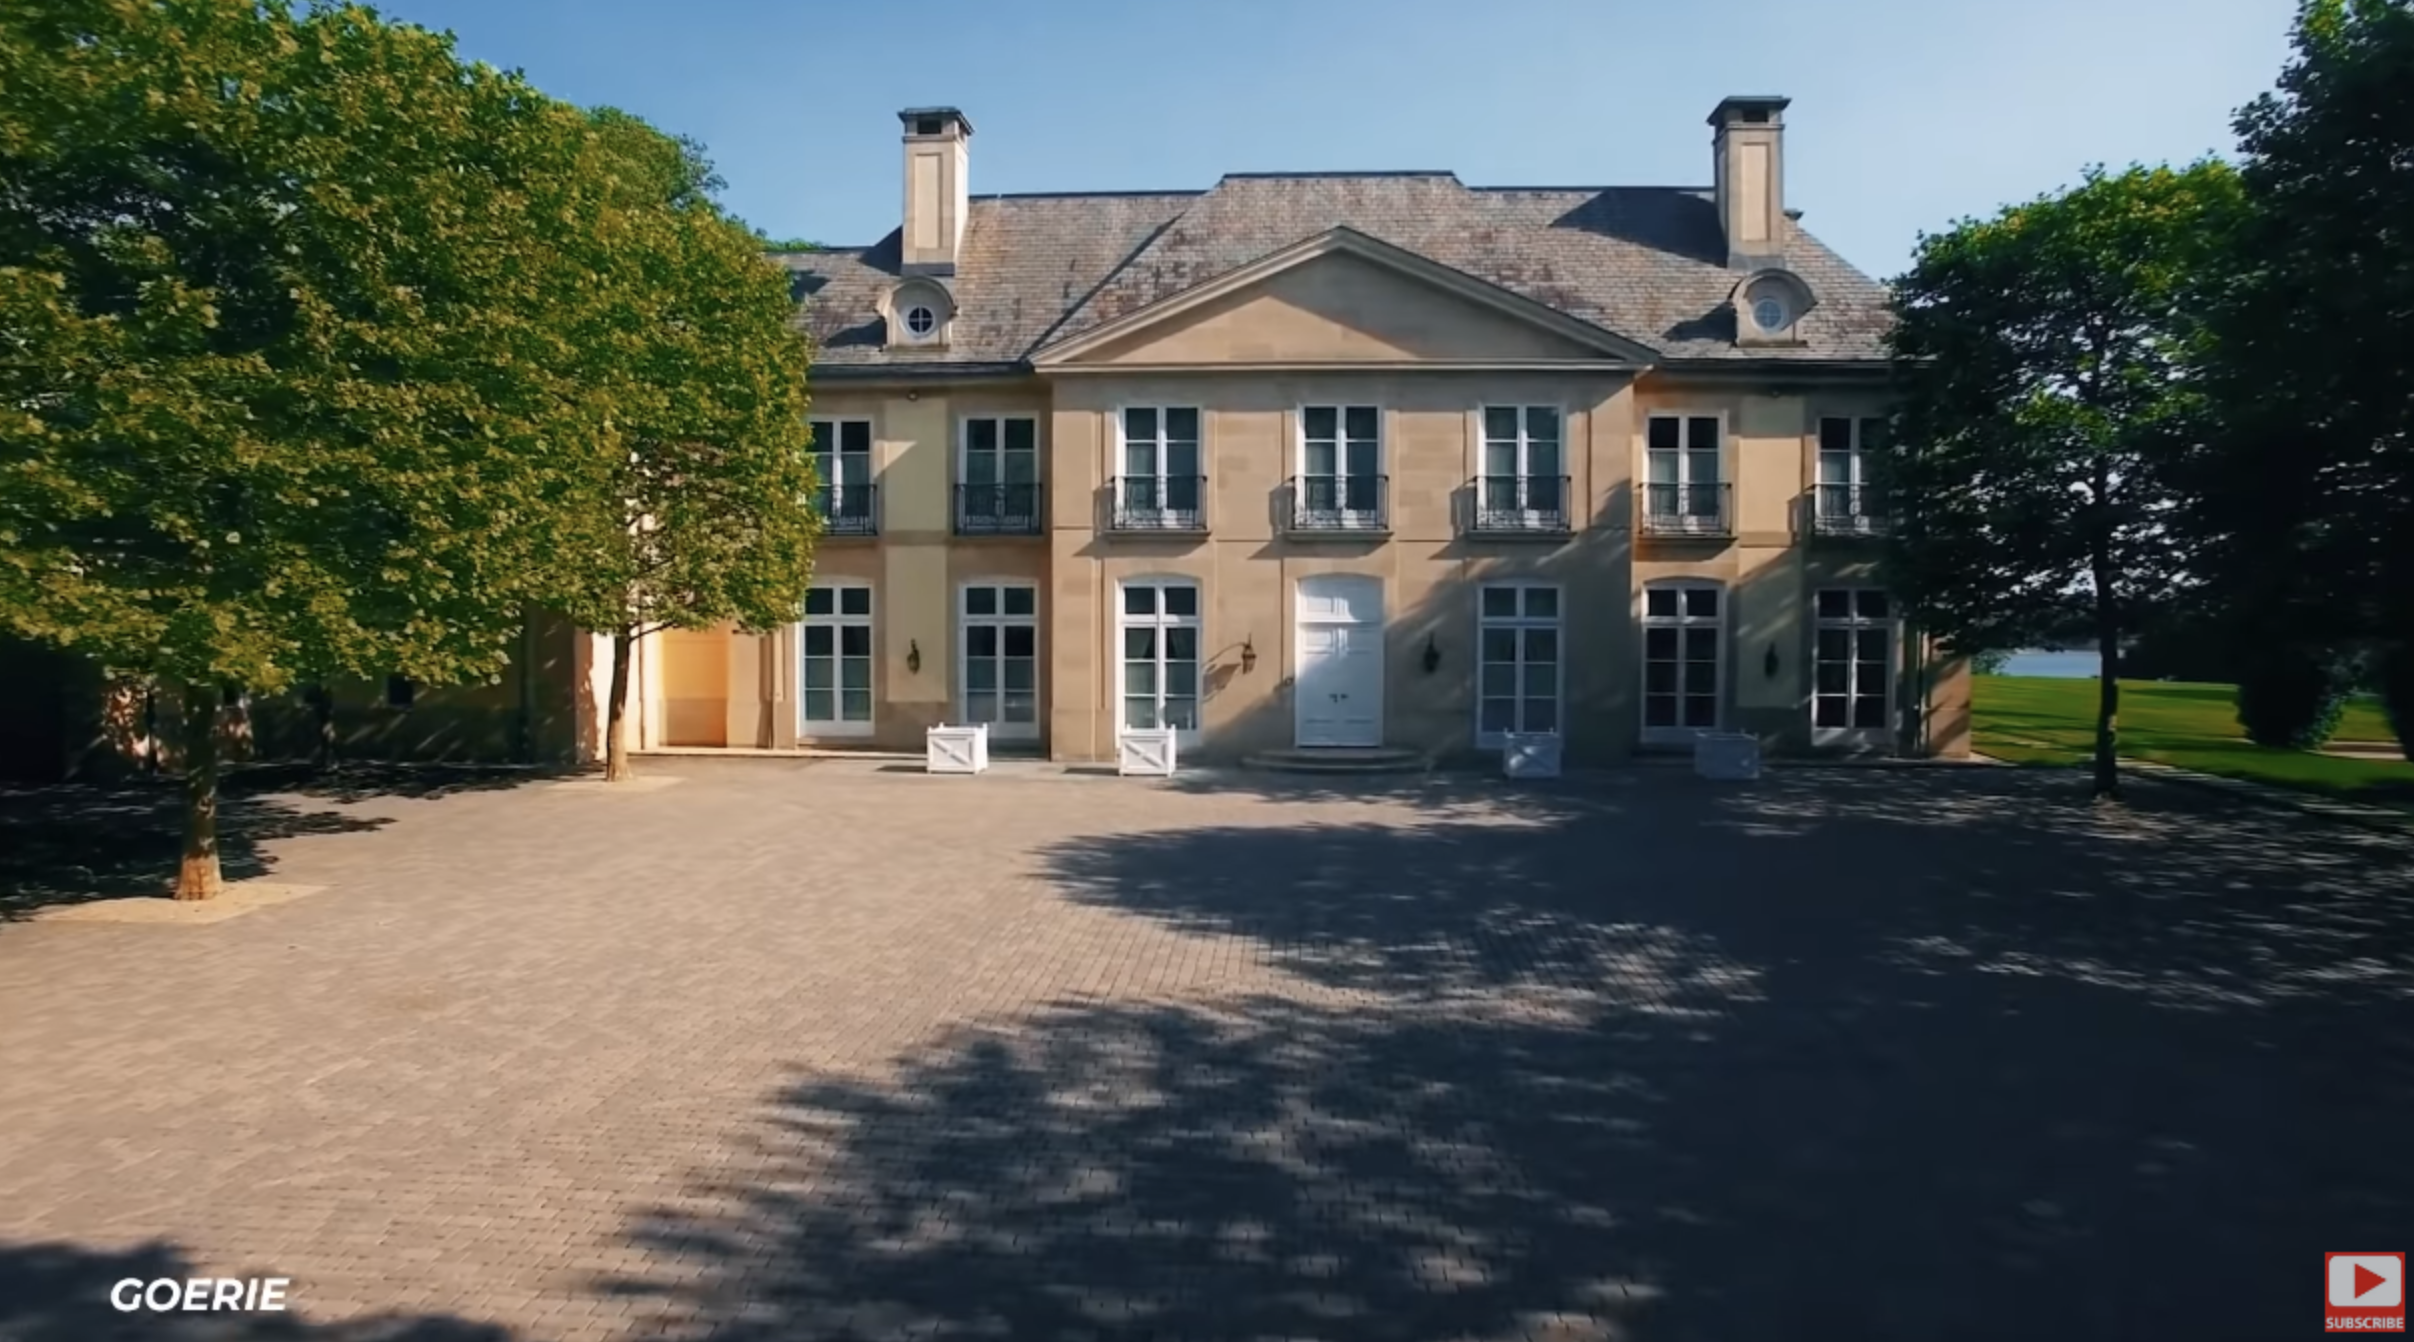 Jon Bon Jovi's magnificent mansion in New Jersey | Source: youtube.com/TheRichest